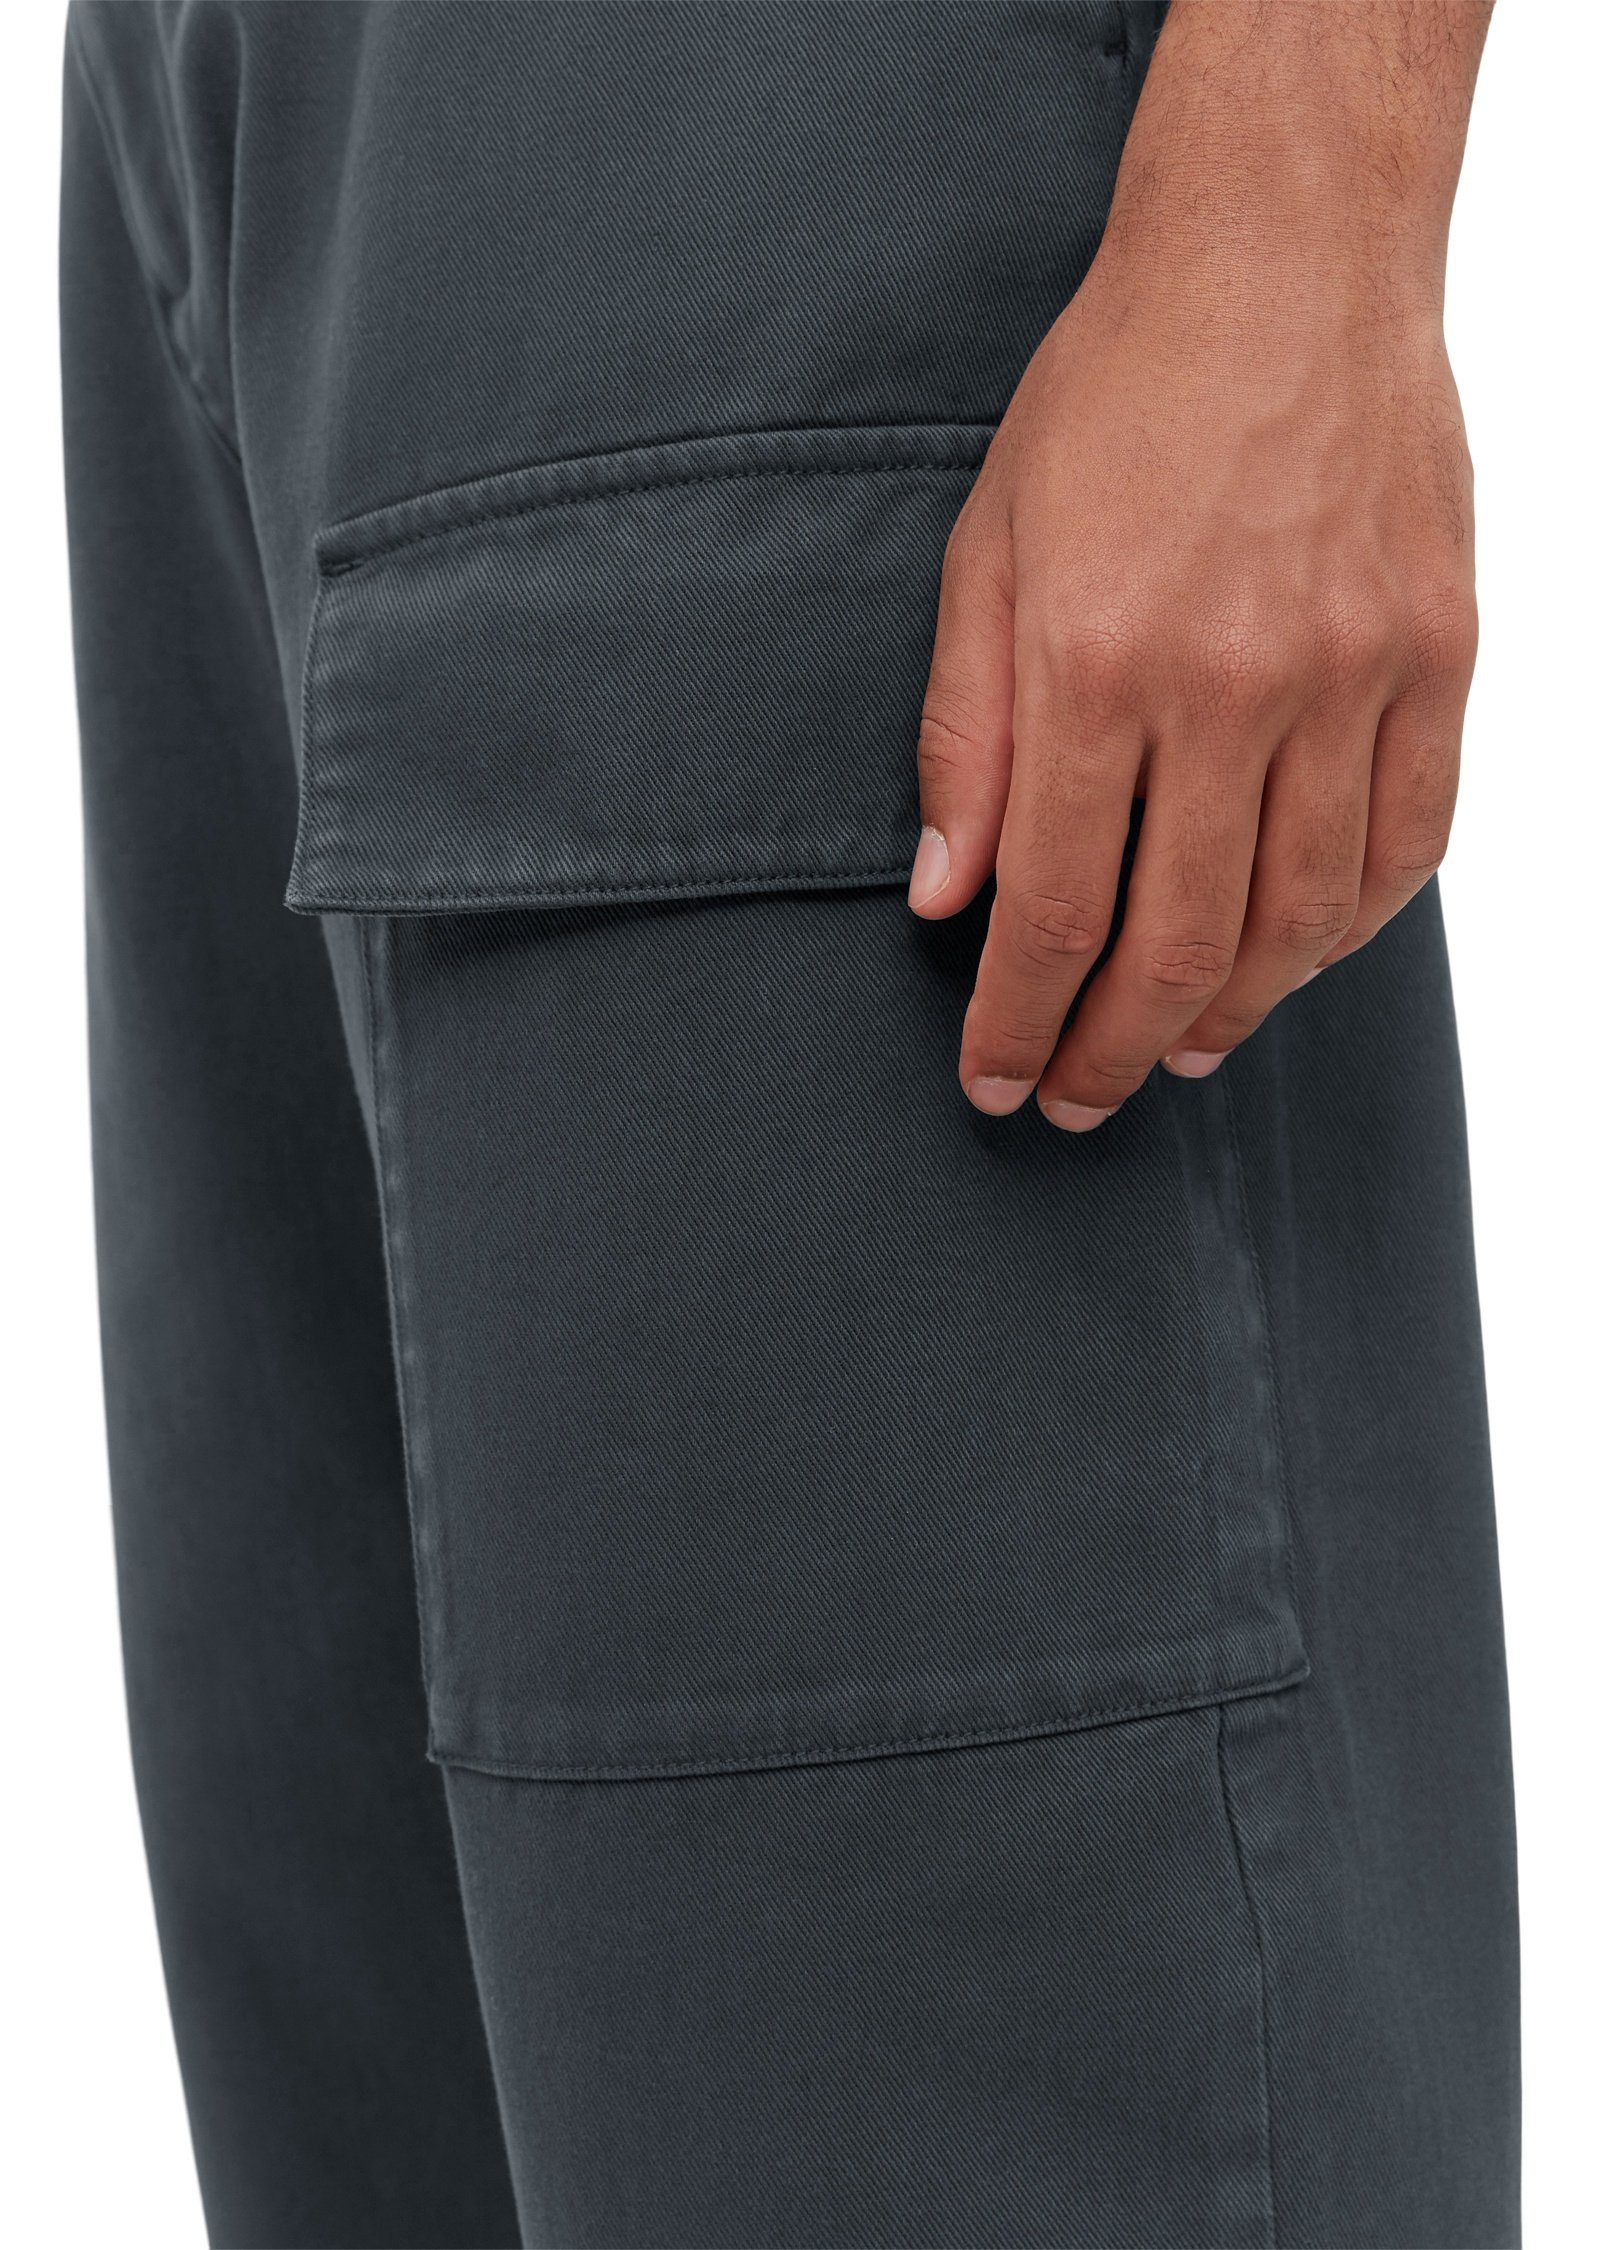 Marc O'Polo DENIM Chinohose aus robuster in Twill-Qualität